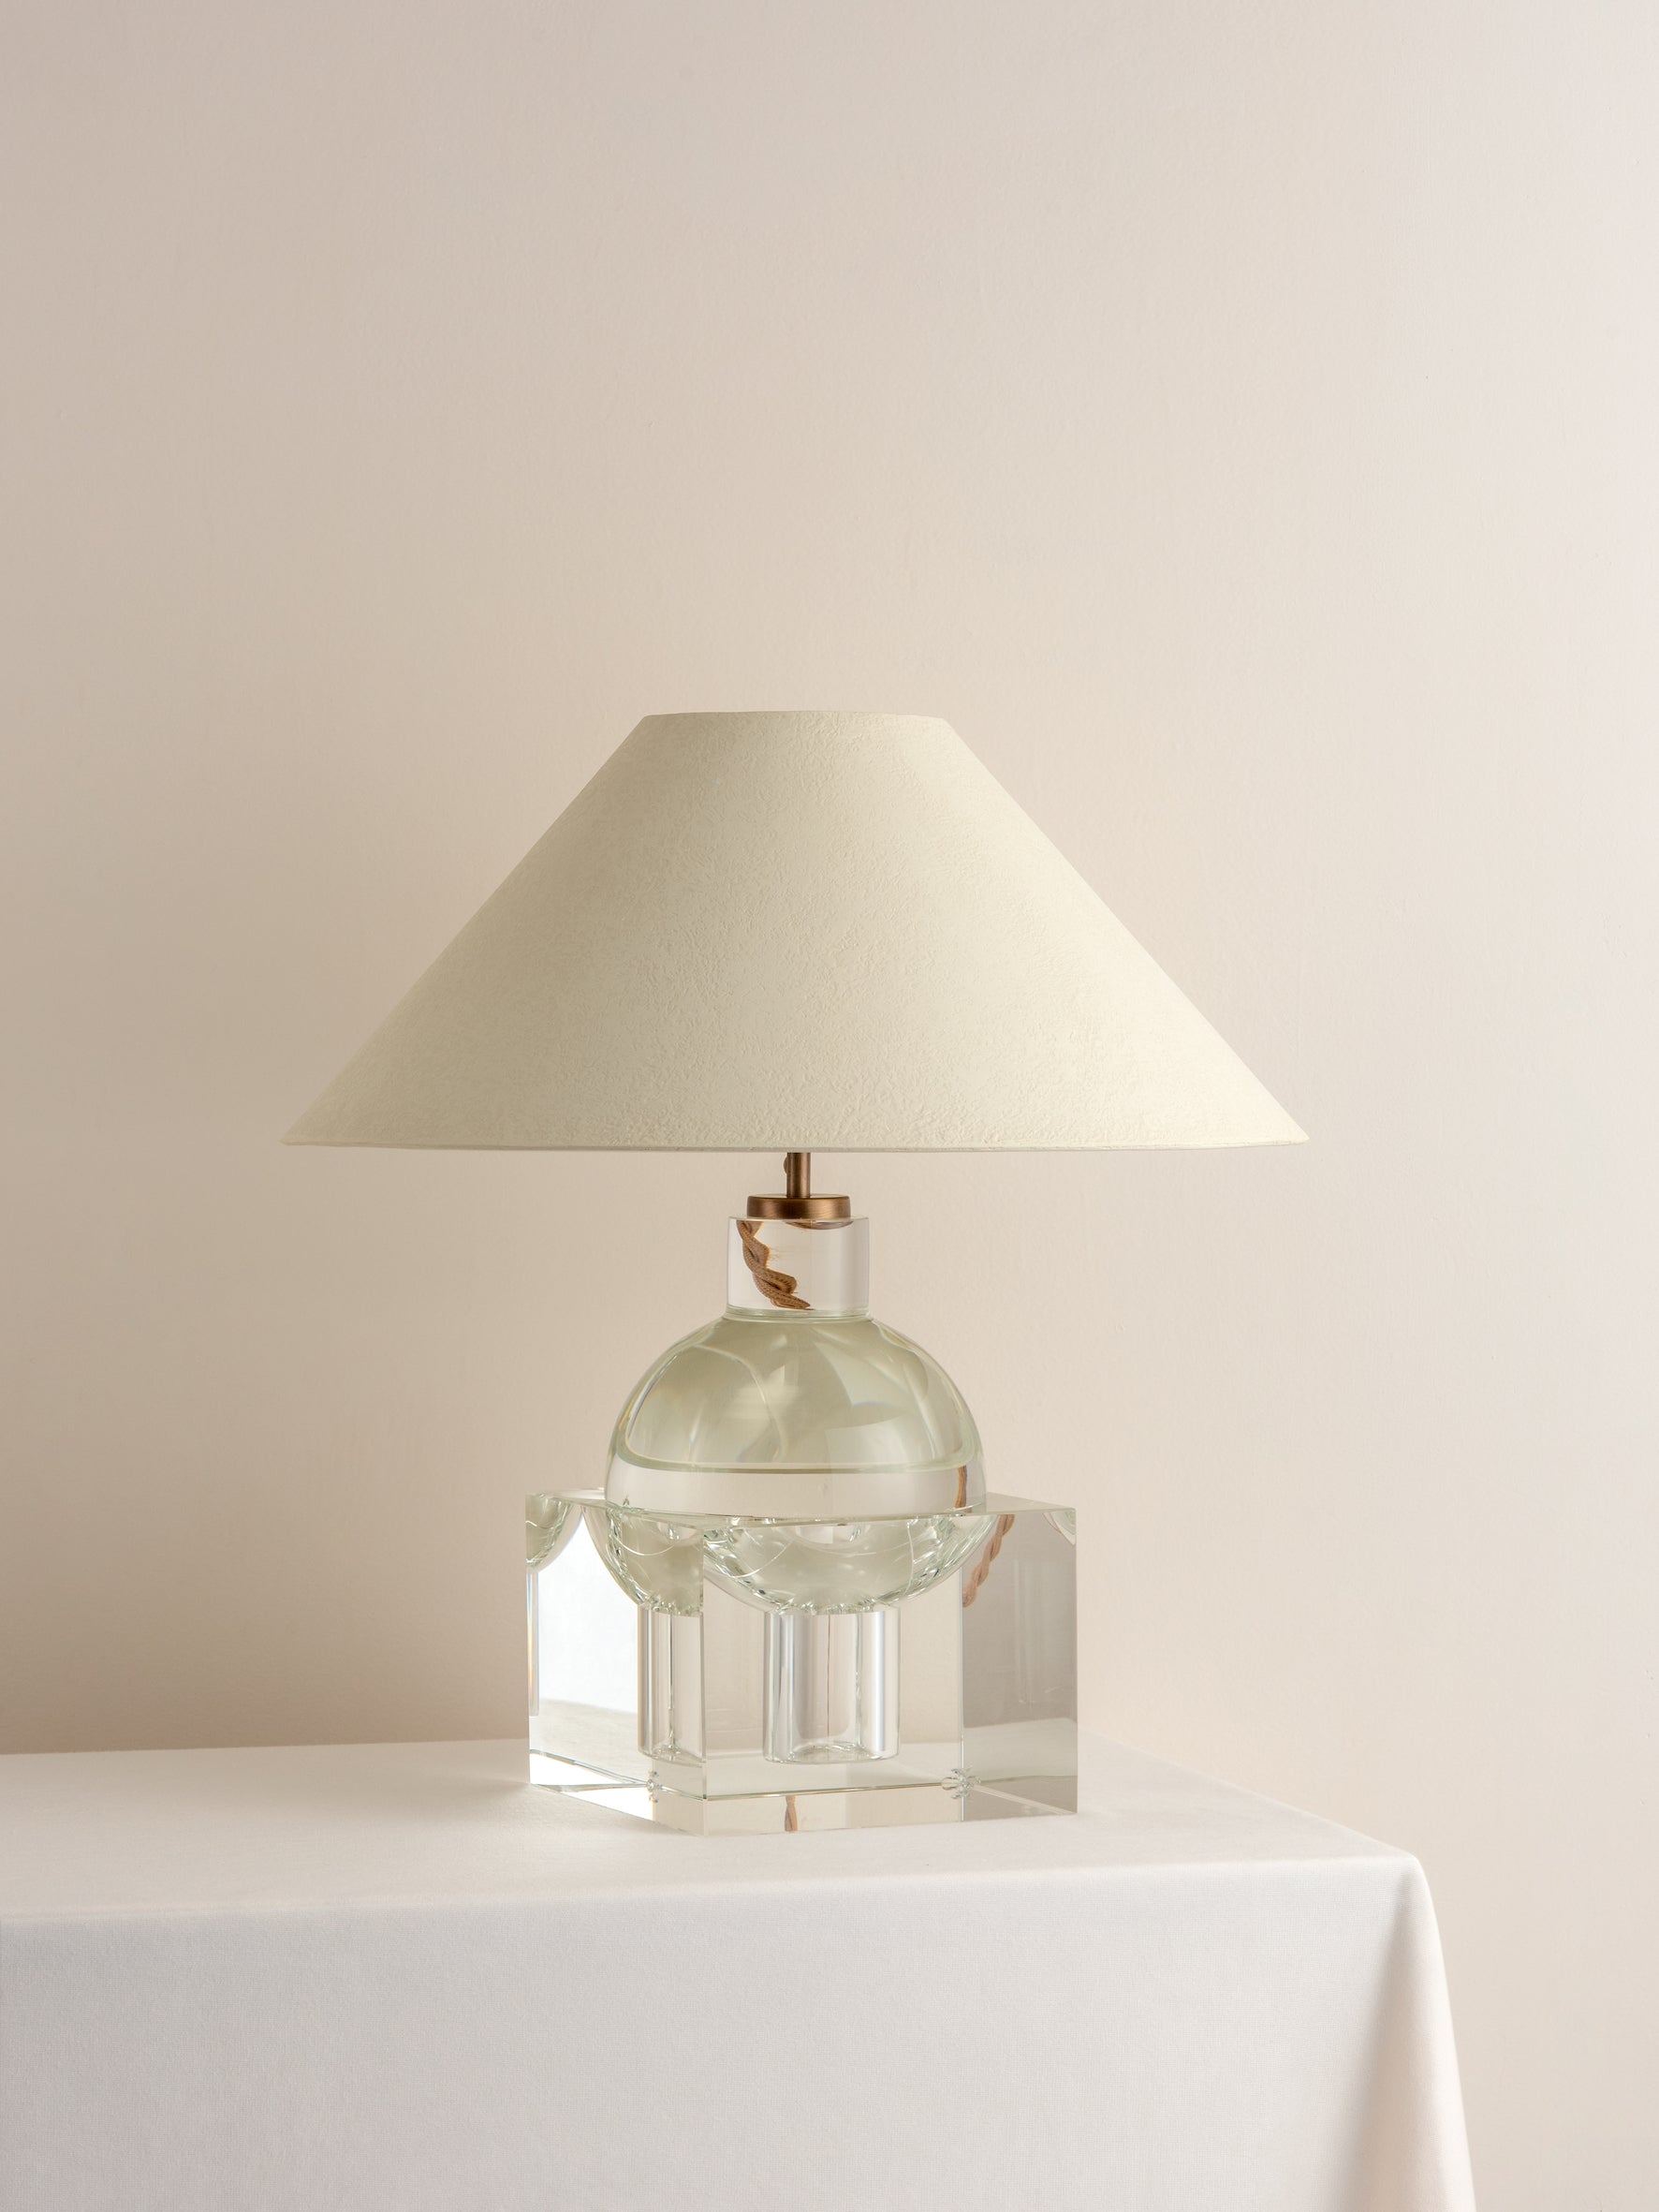 Editions crystal lamp with + plaster shade | Table Lamp | Lights & Lamps | UK | Modern Affordable Designer Lighting